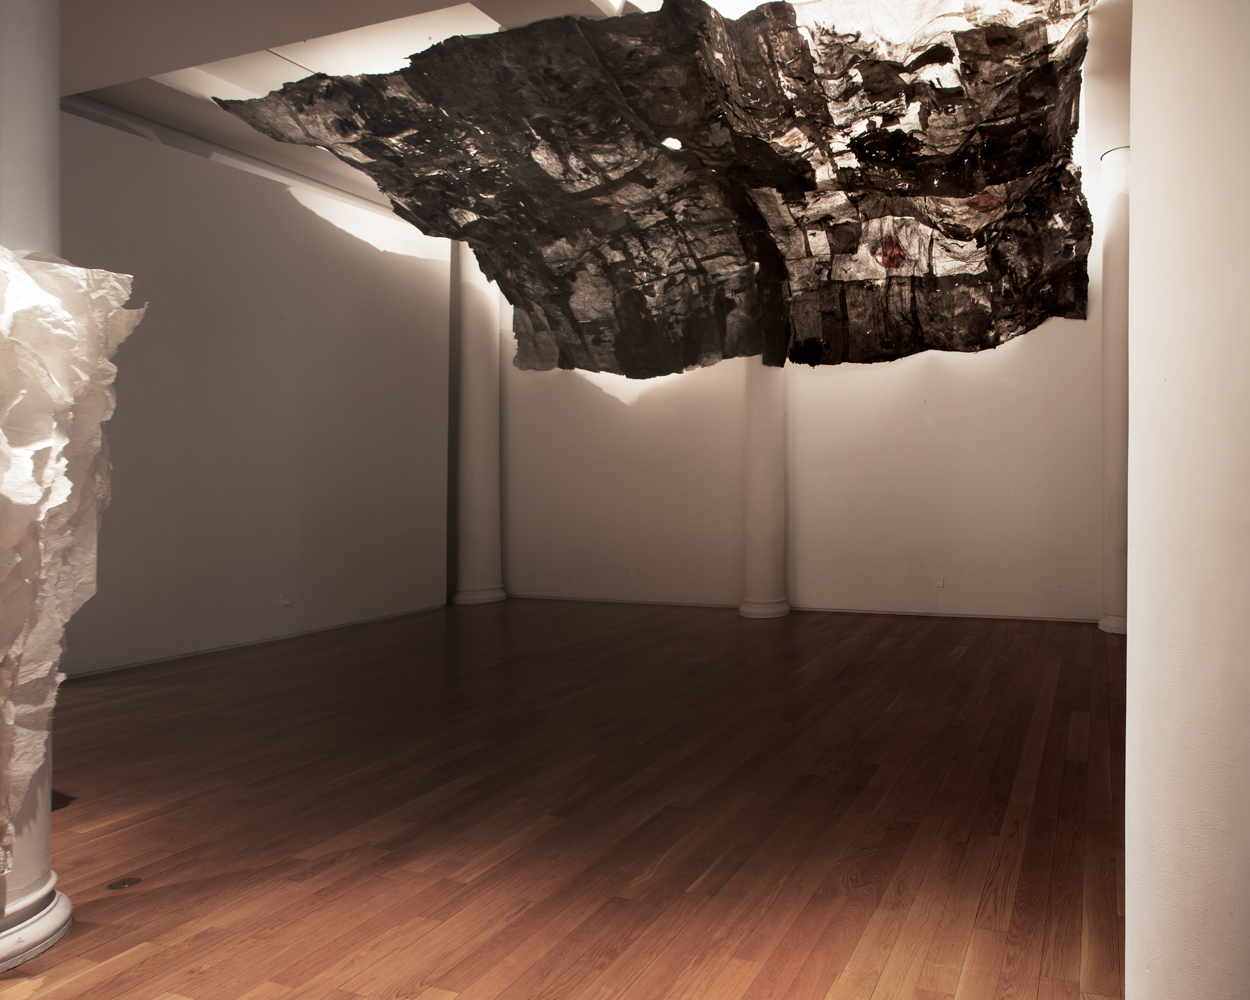  Lin Yan: Dispelling the Clouds installation view. Photography by Jiaxi Yang, courtesy Fou Gallery. 